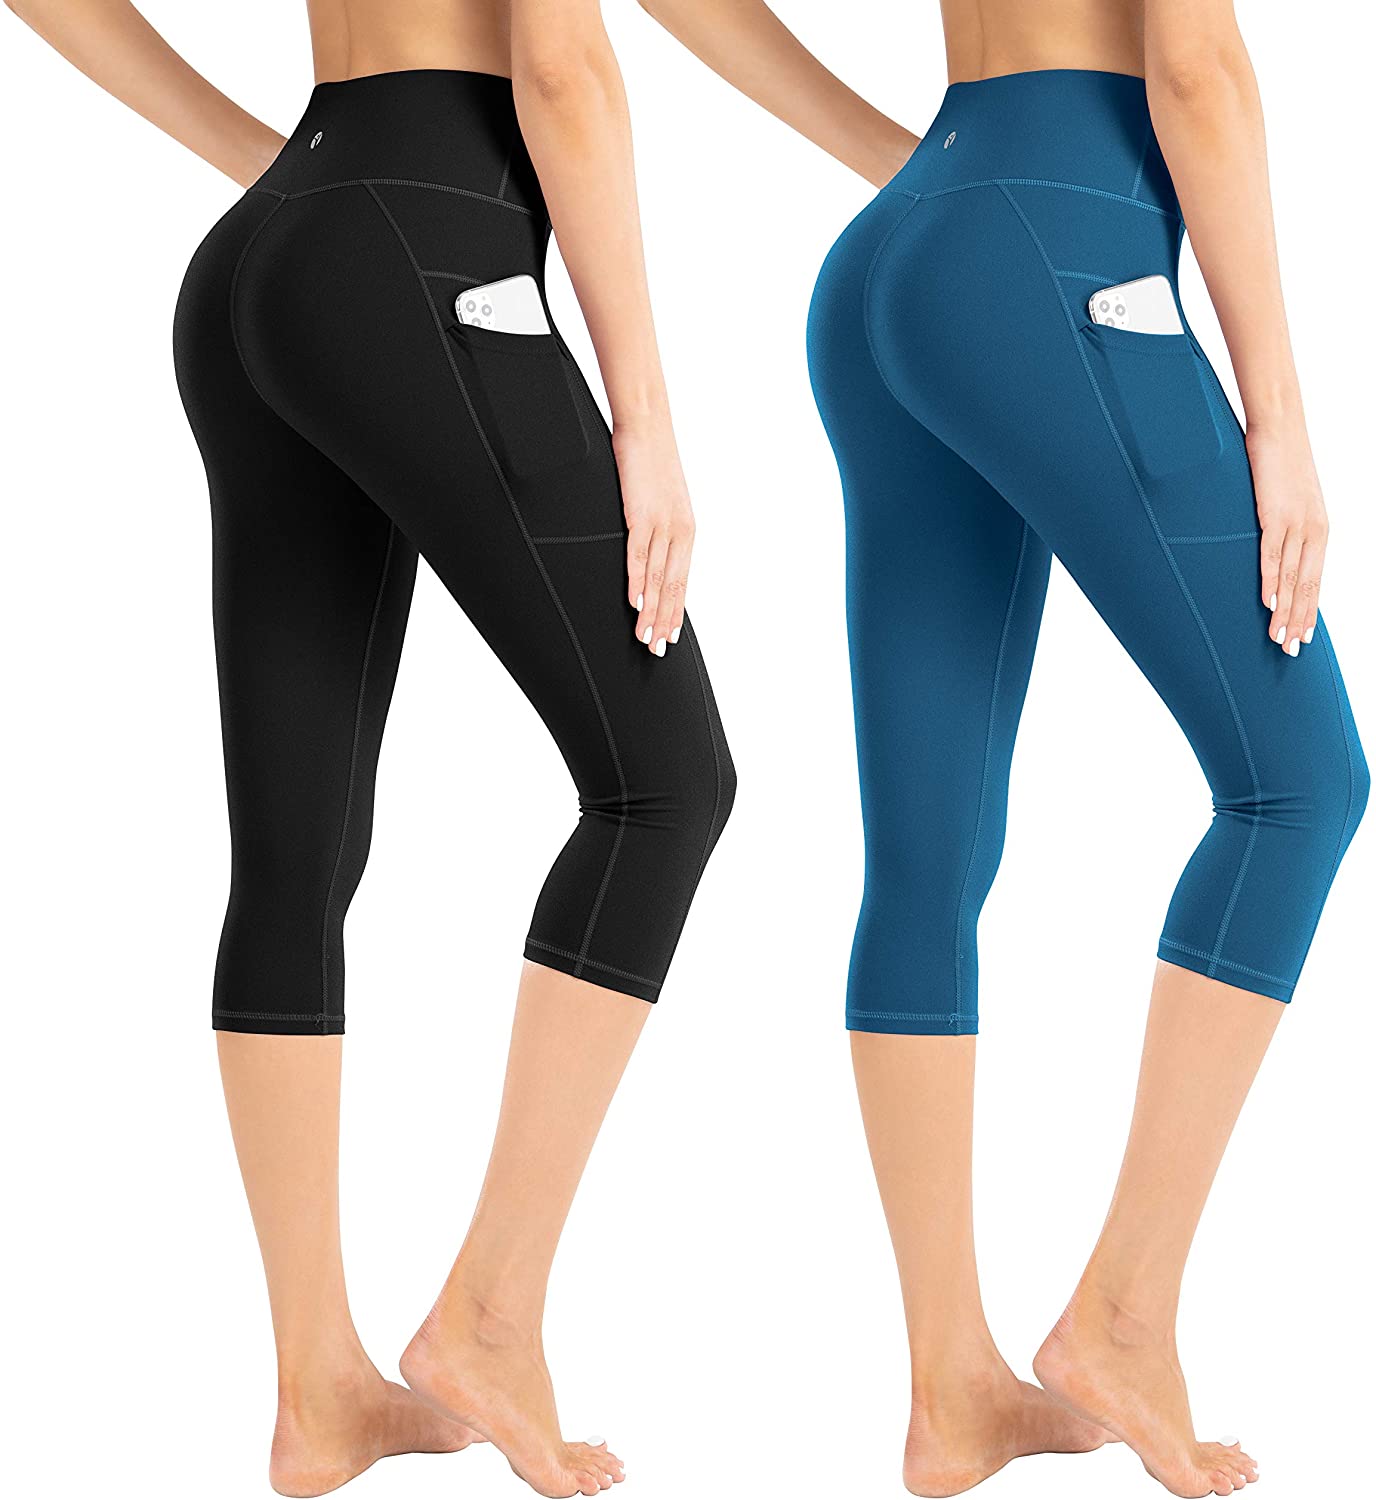 LifeSky Yoga Pants with Pockets for Women High Waisted Tummy Control Leggings 4 Way Stretch Workout Pants 